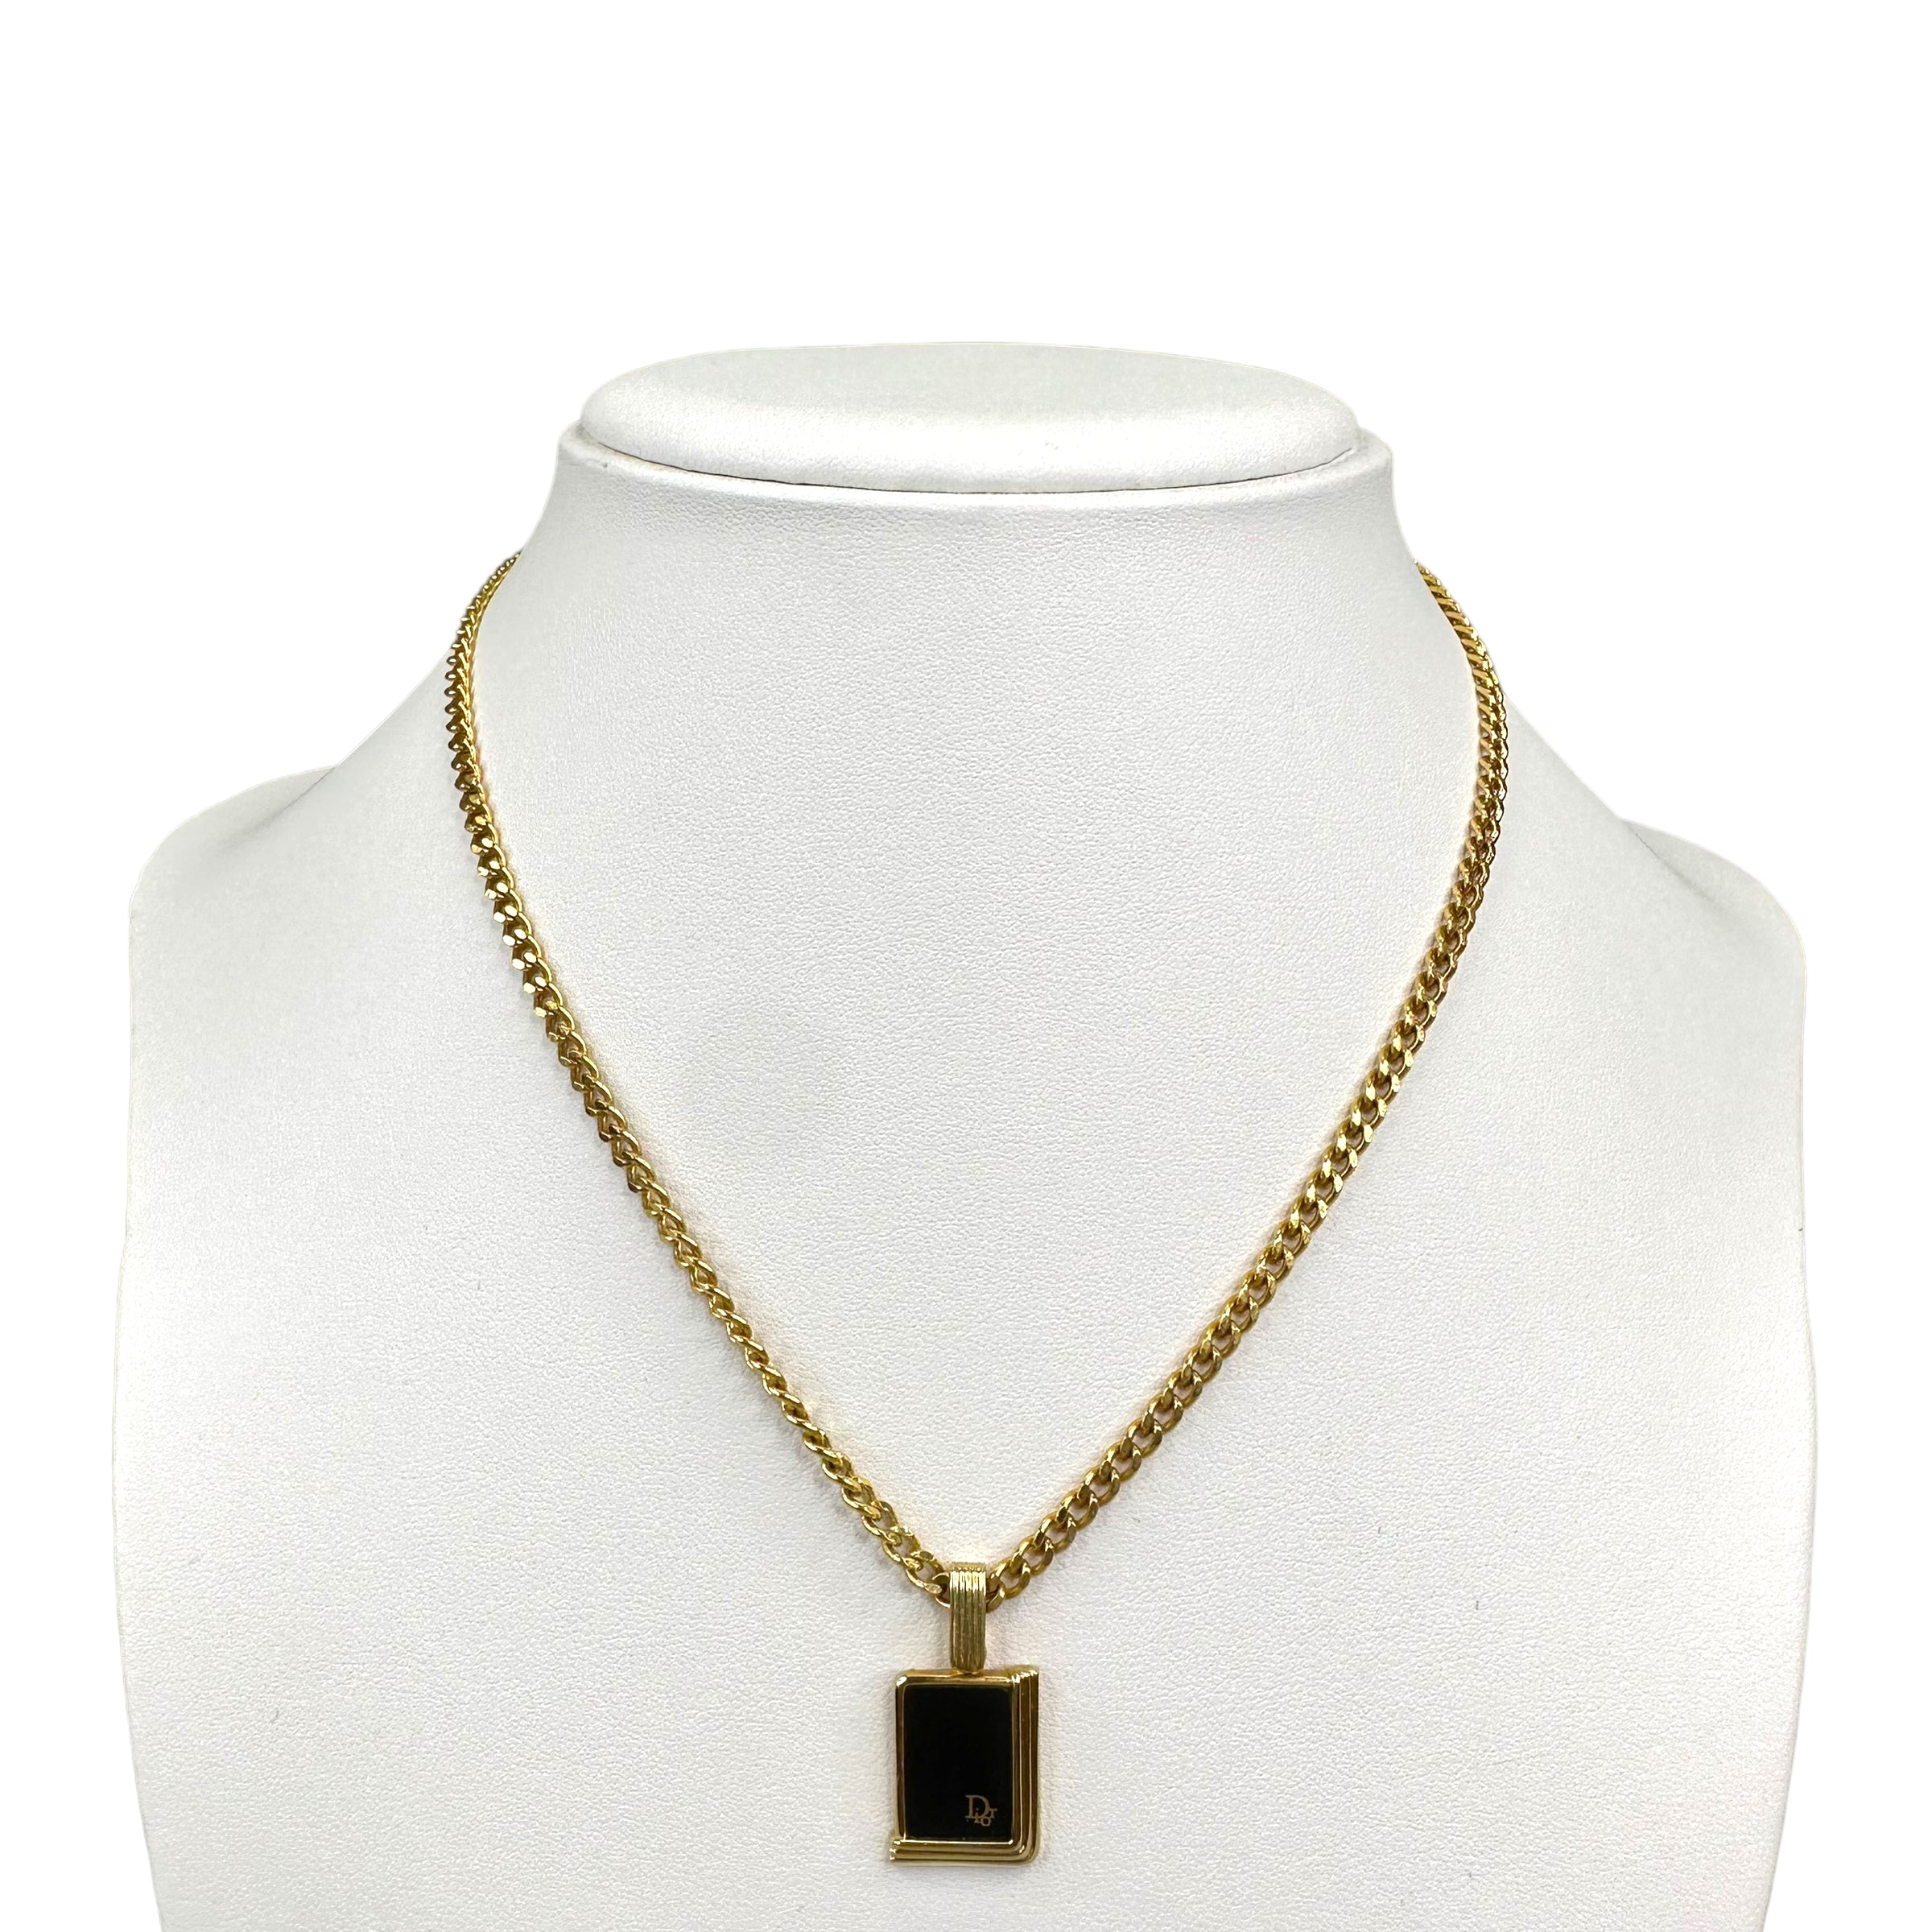 DIOR BLACK/GOLD PLATED NECKLACE